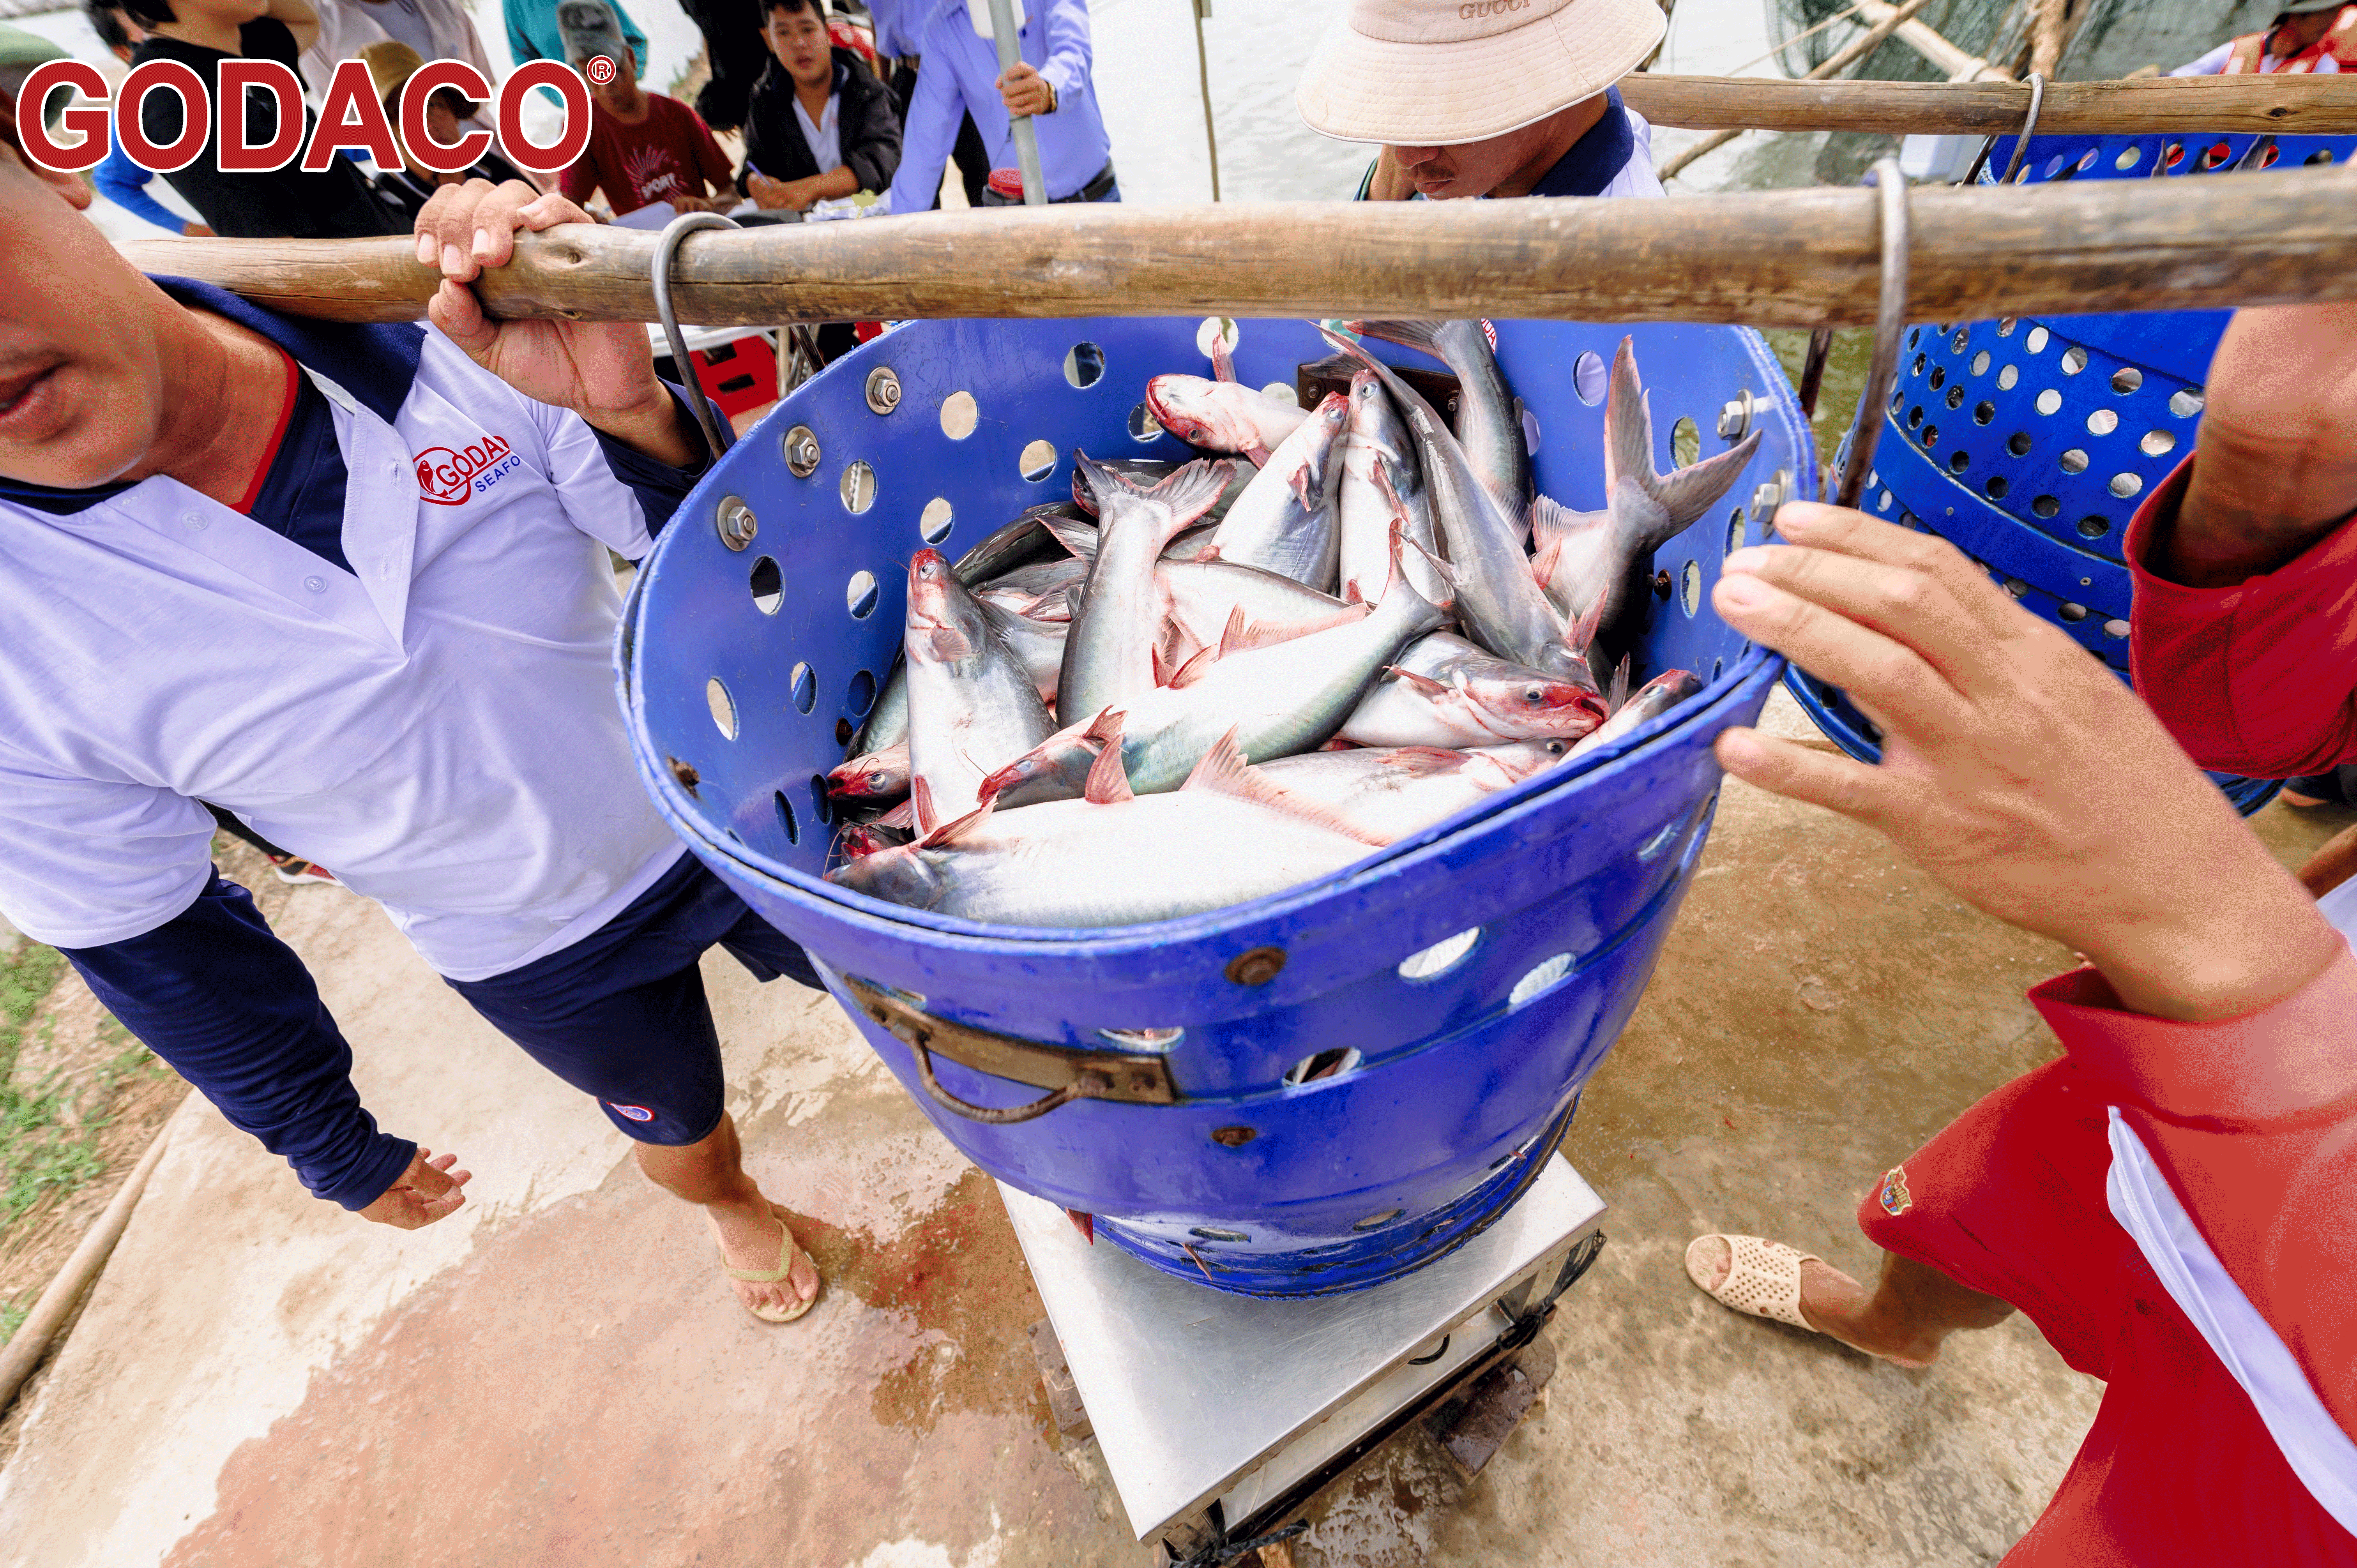 Tien Giang farmers are excited to harvest pangasius because of high prices after Tet holiday